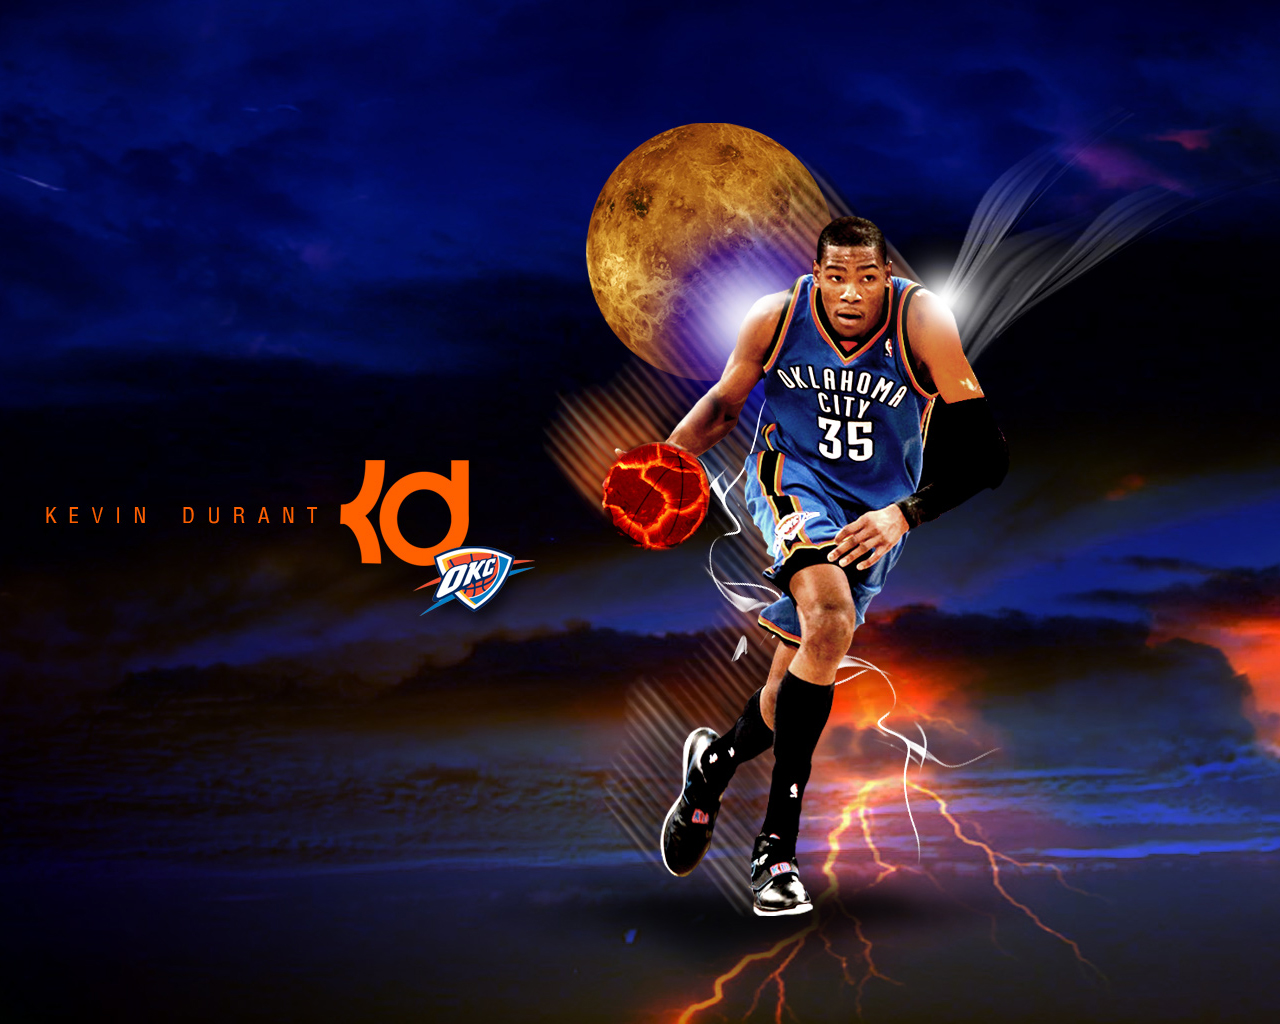 Kevin Durant The Sports Stars